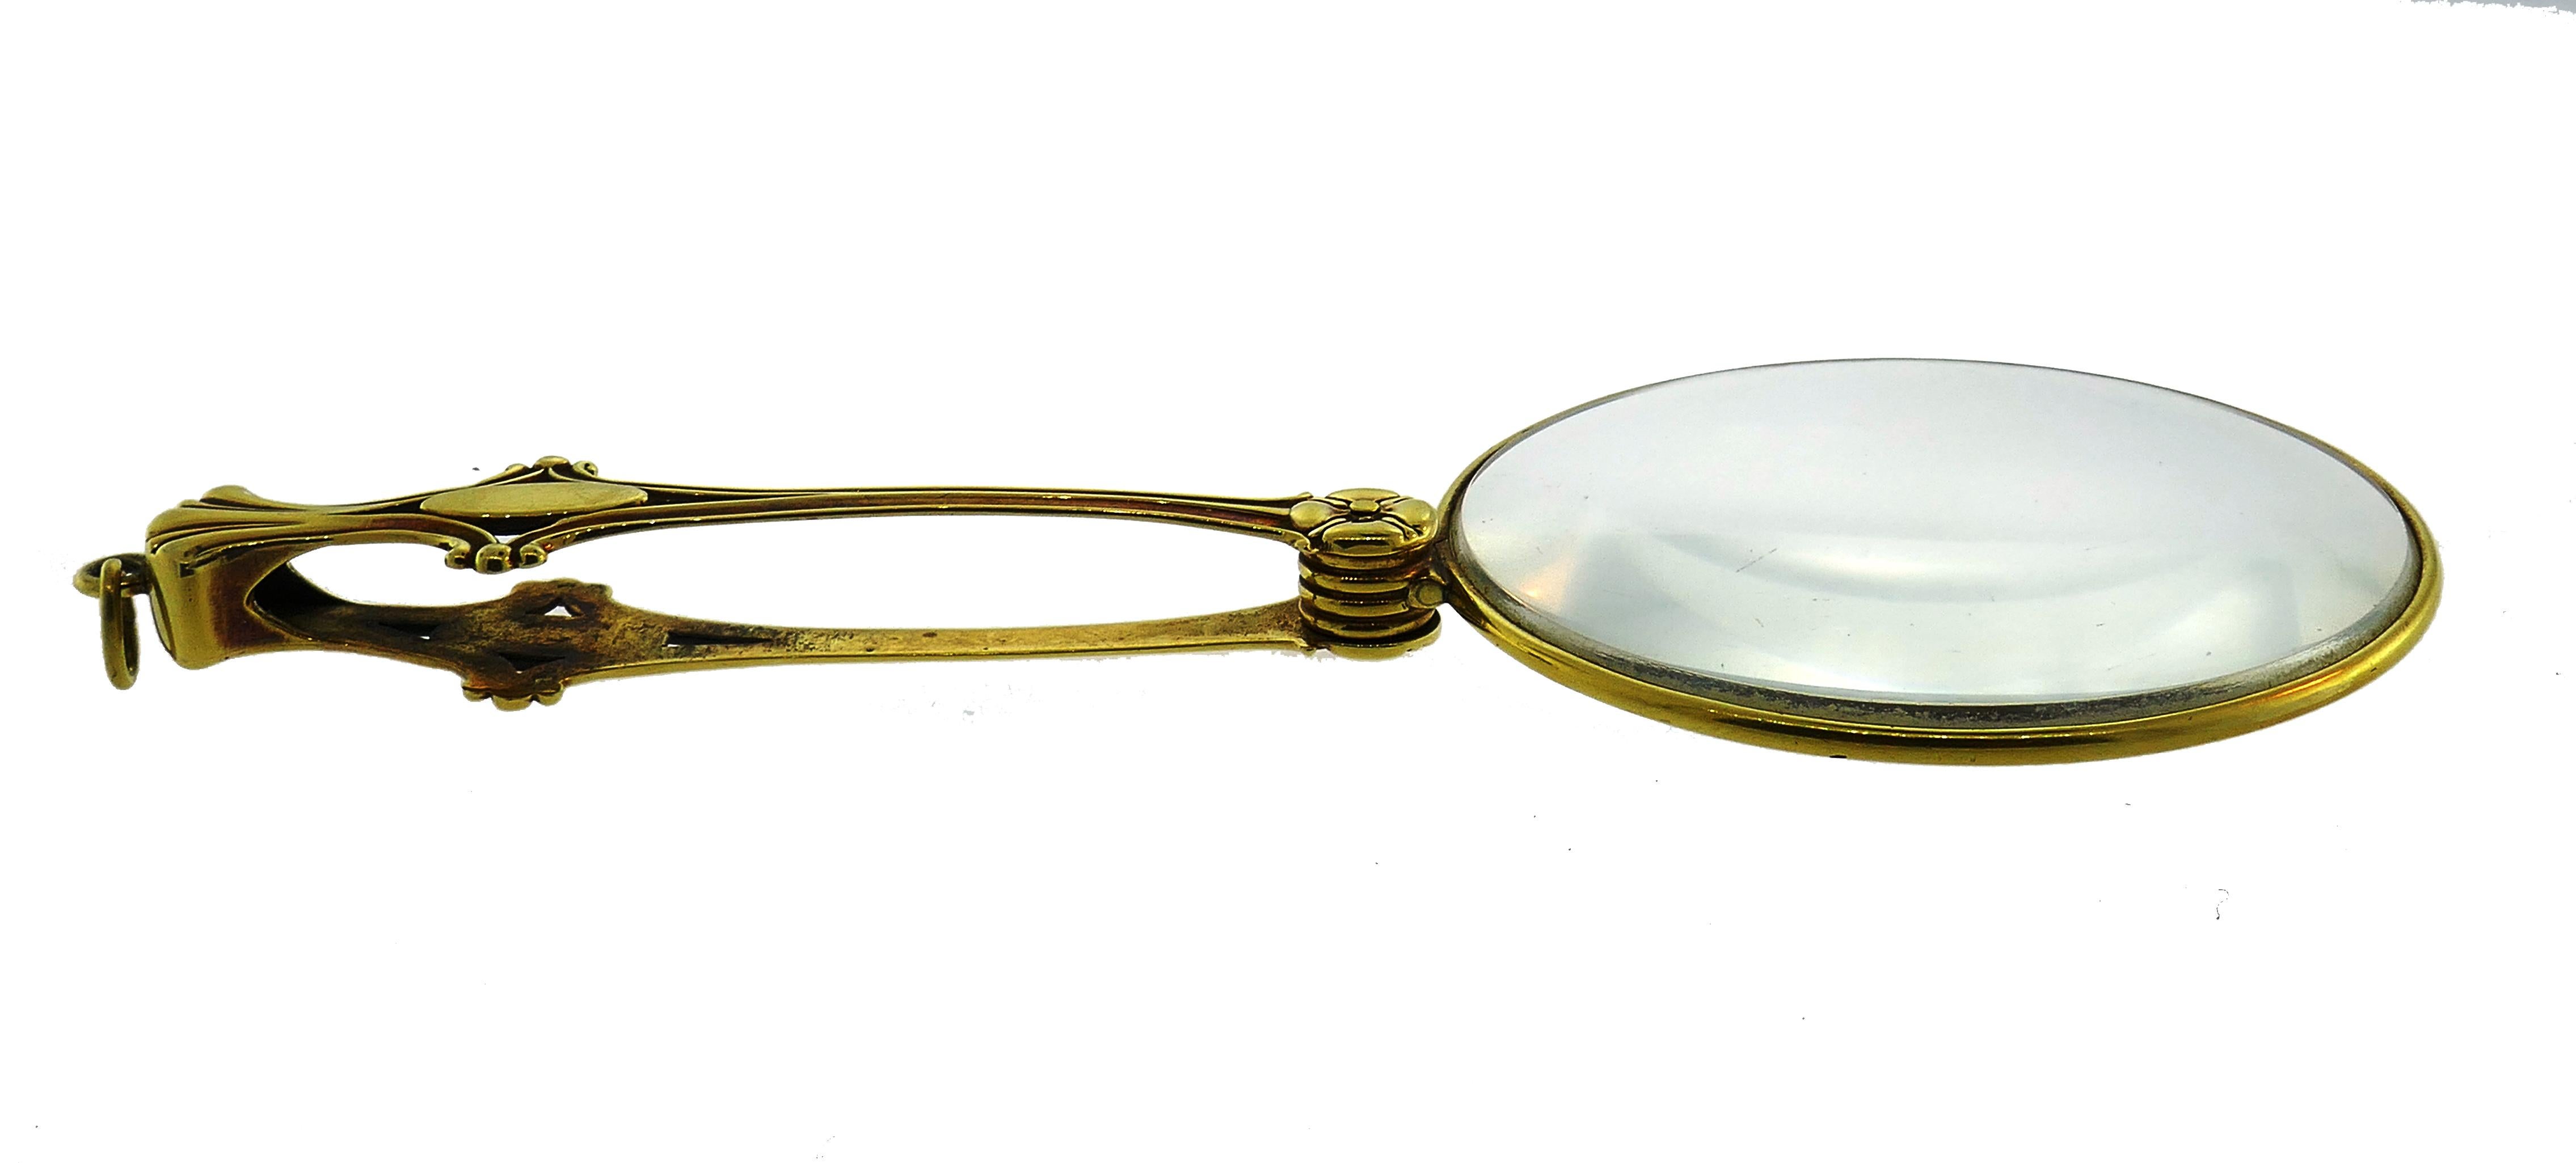 Beautiful magnifying glass that can be put on a chain and worn as a pendant.
Made of 14 karat (stamped) yellow gold.
Measurements: diameter 2-1/4 inches (5.8 cm); length when open 5-1/4 inches (13.5 cm).
Weight 49.1 grams.